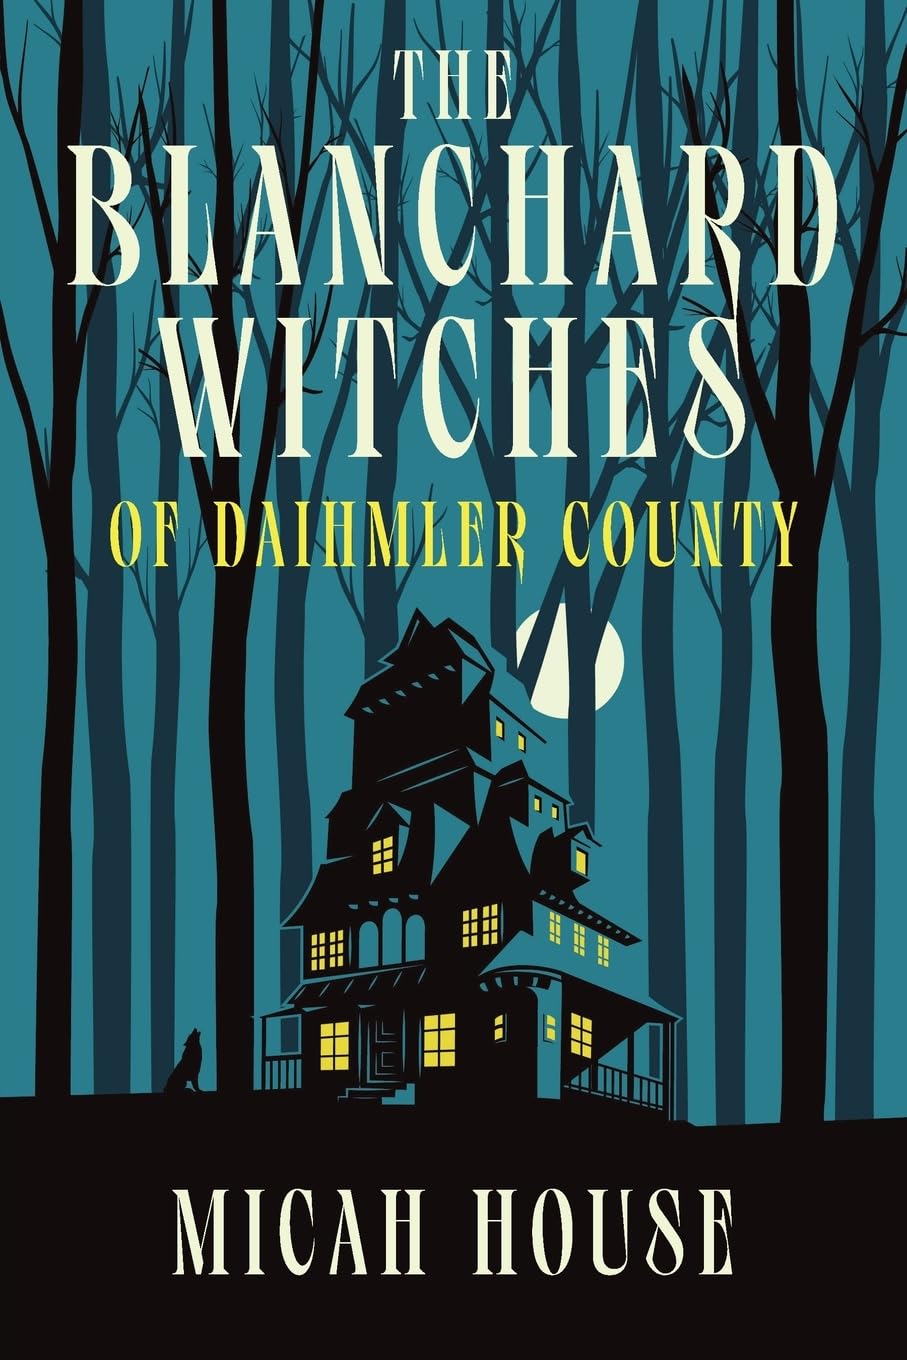 The Blanchard Witches of Daihmler County (Book 1 of 5)